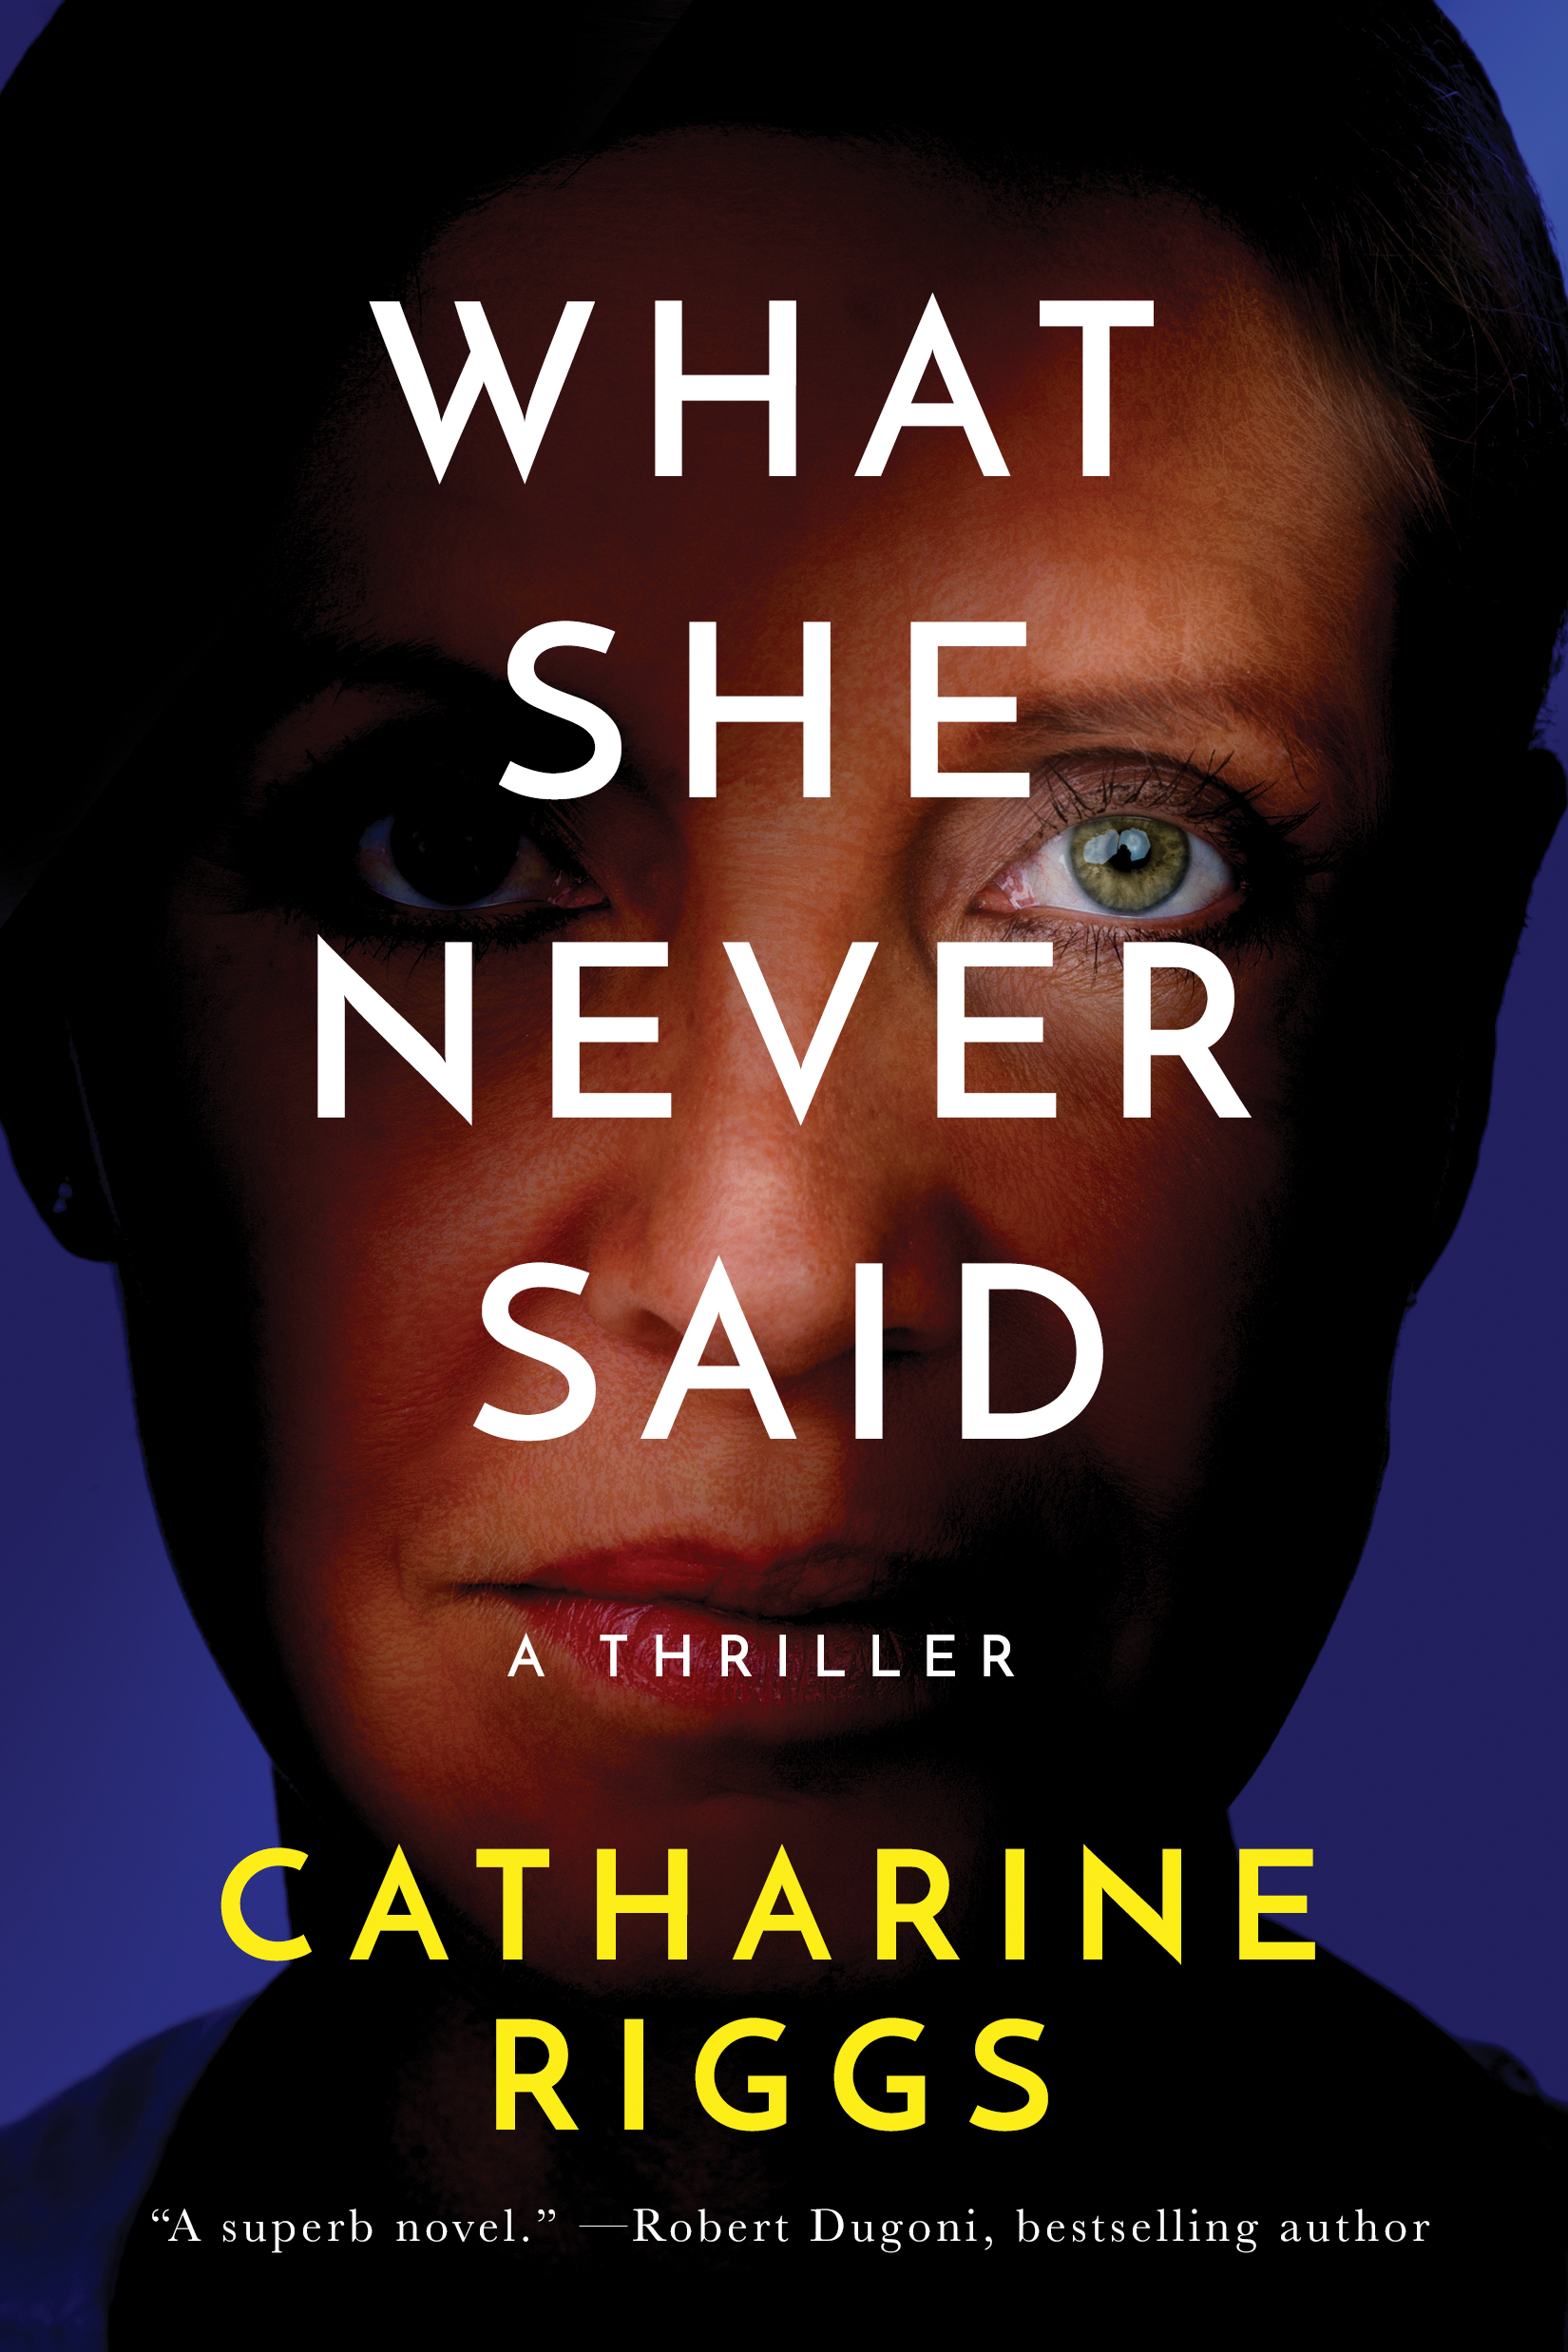 What She Never Said by Catharine Riggs